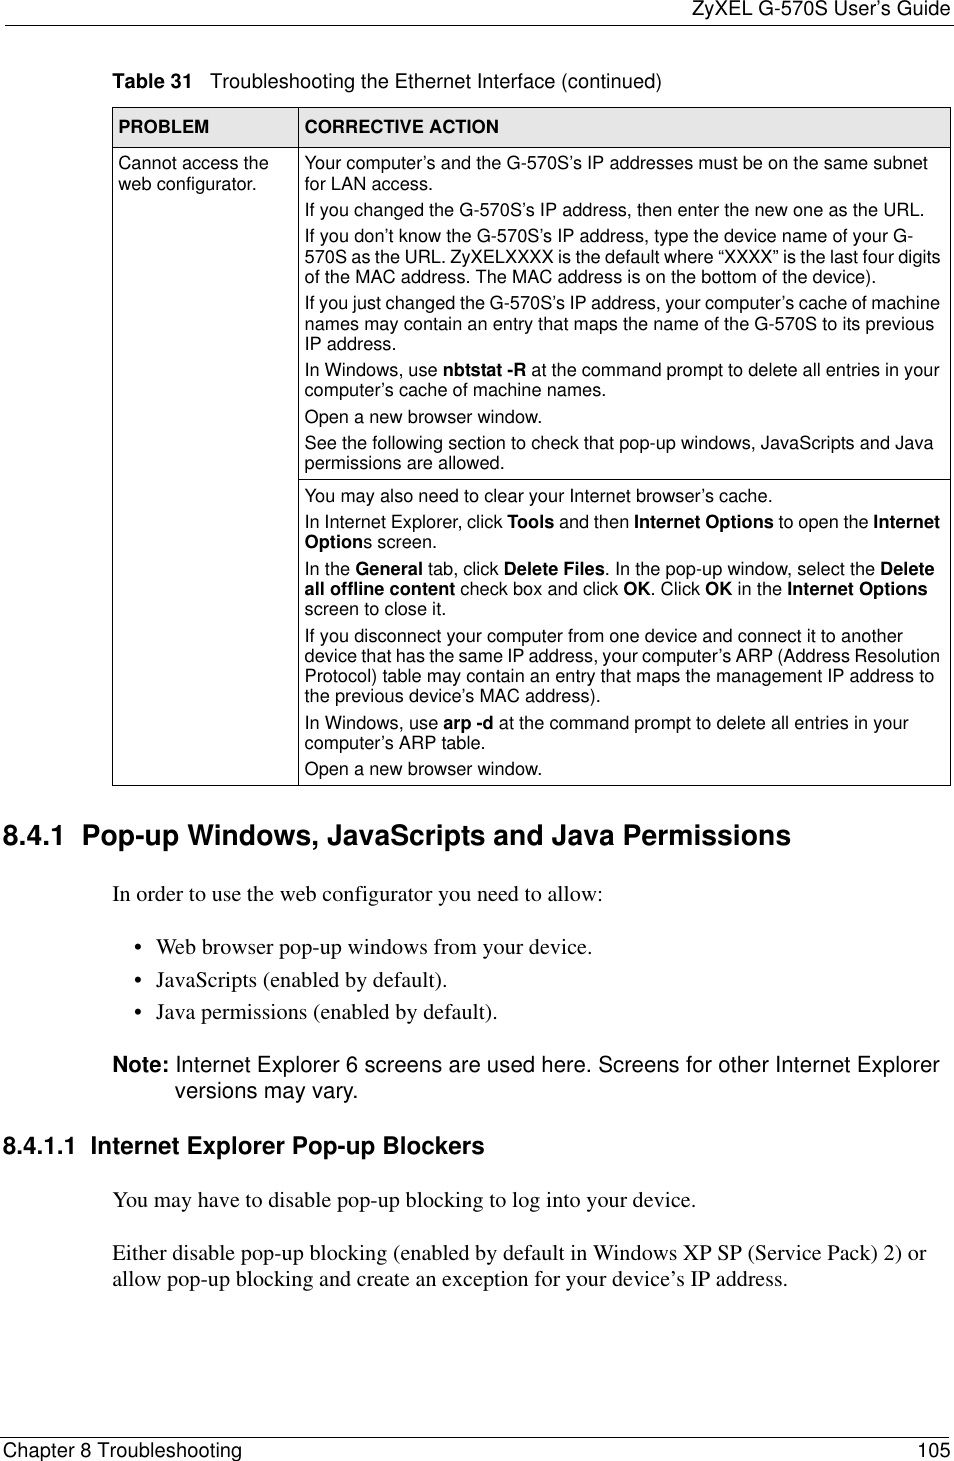 ZyXEL G-570S User’s GuideChapter 8 Troubleshooting 1058.4.1  Pop-up Windows, JavaScripts and Java Permissions In order to use the web configurator you need to allow:• Web browser pop-up windows from your device.• JavaScripts (enabled by default).• Java permissions (enabled by default).Note: Internet Explorer 6 screens are used here. Screens for other Internet Explorer versions may vary.8.4.1.1  Internet Explorer Pop-up BlockersYou may have to disable pop-up blocking to log into your device. Either disable pop-up blocking (enabled by default in Windows XP SP (Service Pack) 2) or allow pop-up blocking and create an exception for your device’s IP address.Cannot access the web configurator. Your computer’s and the G-570S’s IP addresses must be on the same subnet for LAN access.If you changed the G-570S’s IP address, then enter the new one as the URL.If you don’t know the G-570S’s IP address, type the device name of your G-570S as the URL. ZyXELXXXX is the default where “XXXX” is the last four digits of the MAC address. The MAC address is on the bottom of the device). If you just changed the G-570S’s IP address, your computer’s cache of machine names may contain an entry that maps the name of the G-570S to its previous IP address. In Windows, use nbtstat -R at the command prompt to delete all entries in your computer’s cache of machine names.Open a new browser window.See the following section to check that pop-up windows, JavaScripts and Java permissions are allowed.You may also need to clear your Internet browser’s cache.In Internet Explorer, click Tools and then Internet Options to open the Internet Options screen. In the General tab, click Delete Files. In the pop-up window, select the Deleteall offline content check box and click OK. Click OK in the Internet Optionsscreen to close it.If you disconnect your computer from one device and connect it to another device that has the same IP address, your computer’s ARP (Address Resolution Protocol) table may contain an entry that maps the management IP address to the previous device’s MAC address). In Windows, use arp -d at the command prompt to delete all entries in your computer’s ARP table.Open a new browser window.Table 31   Troubleshooting the Ethernet Interface (continued)PROBLEM CORRECTIVE ACTION